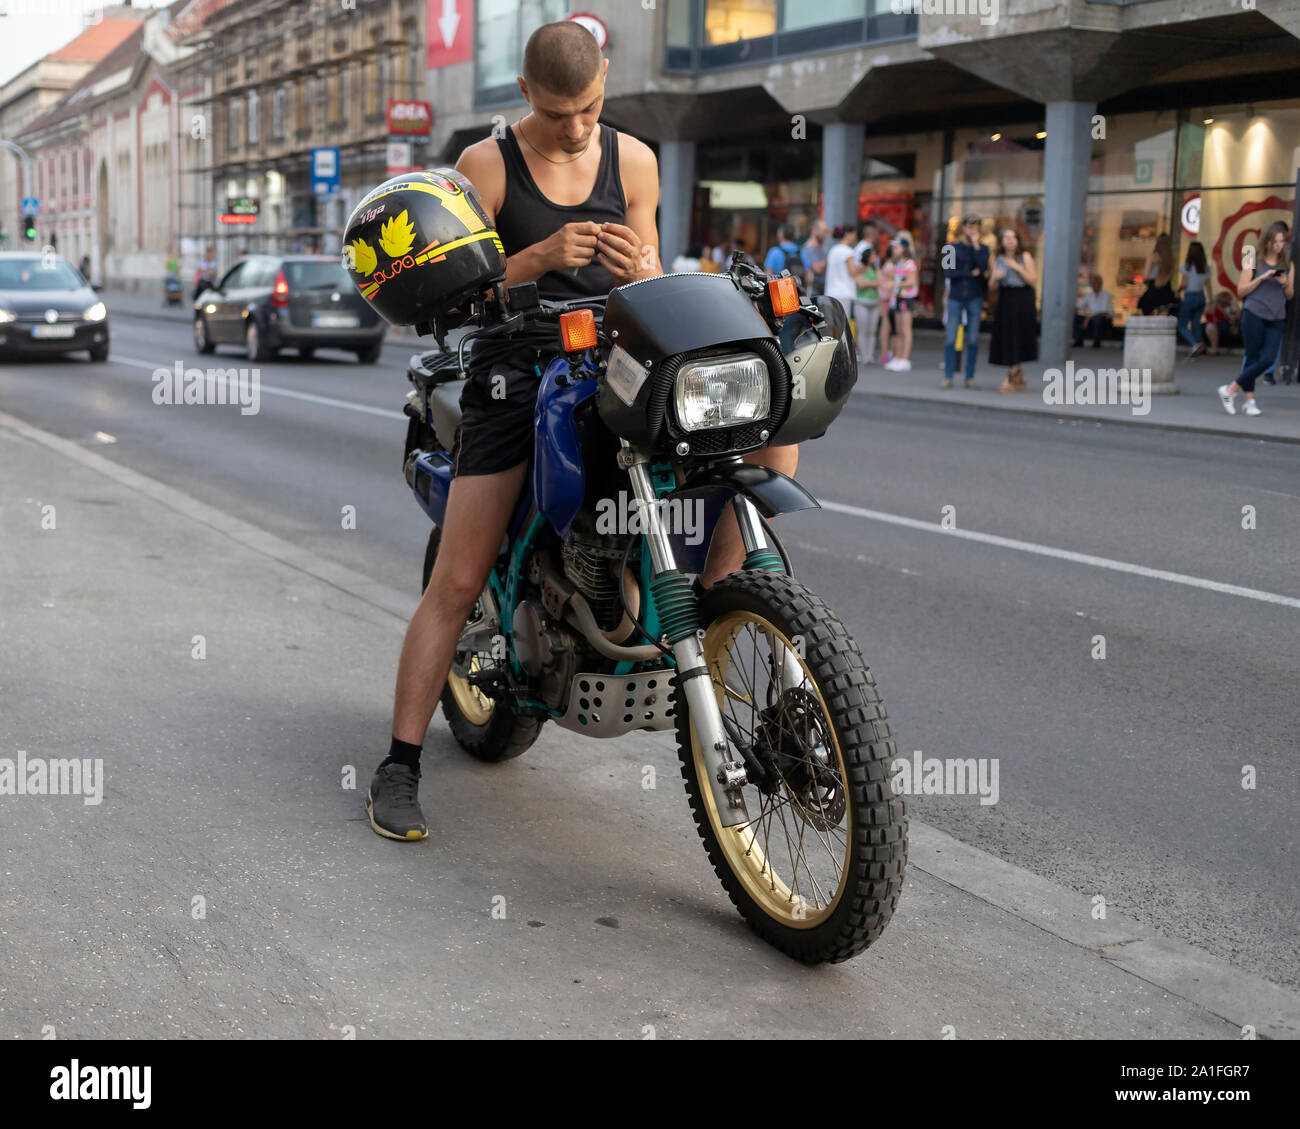 Belgrade, Serbia Aug 29, 2019: Urban scene with a young man sitting on a motorbike parked at a sidewalk Stock Photo